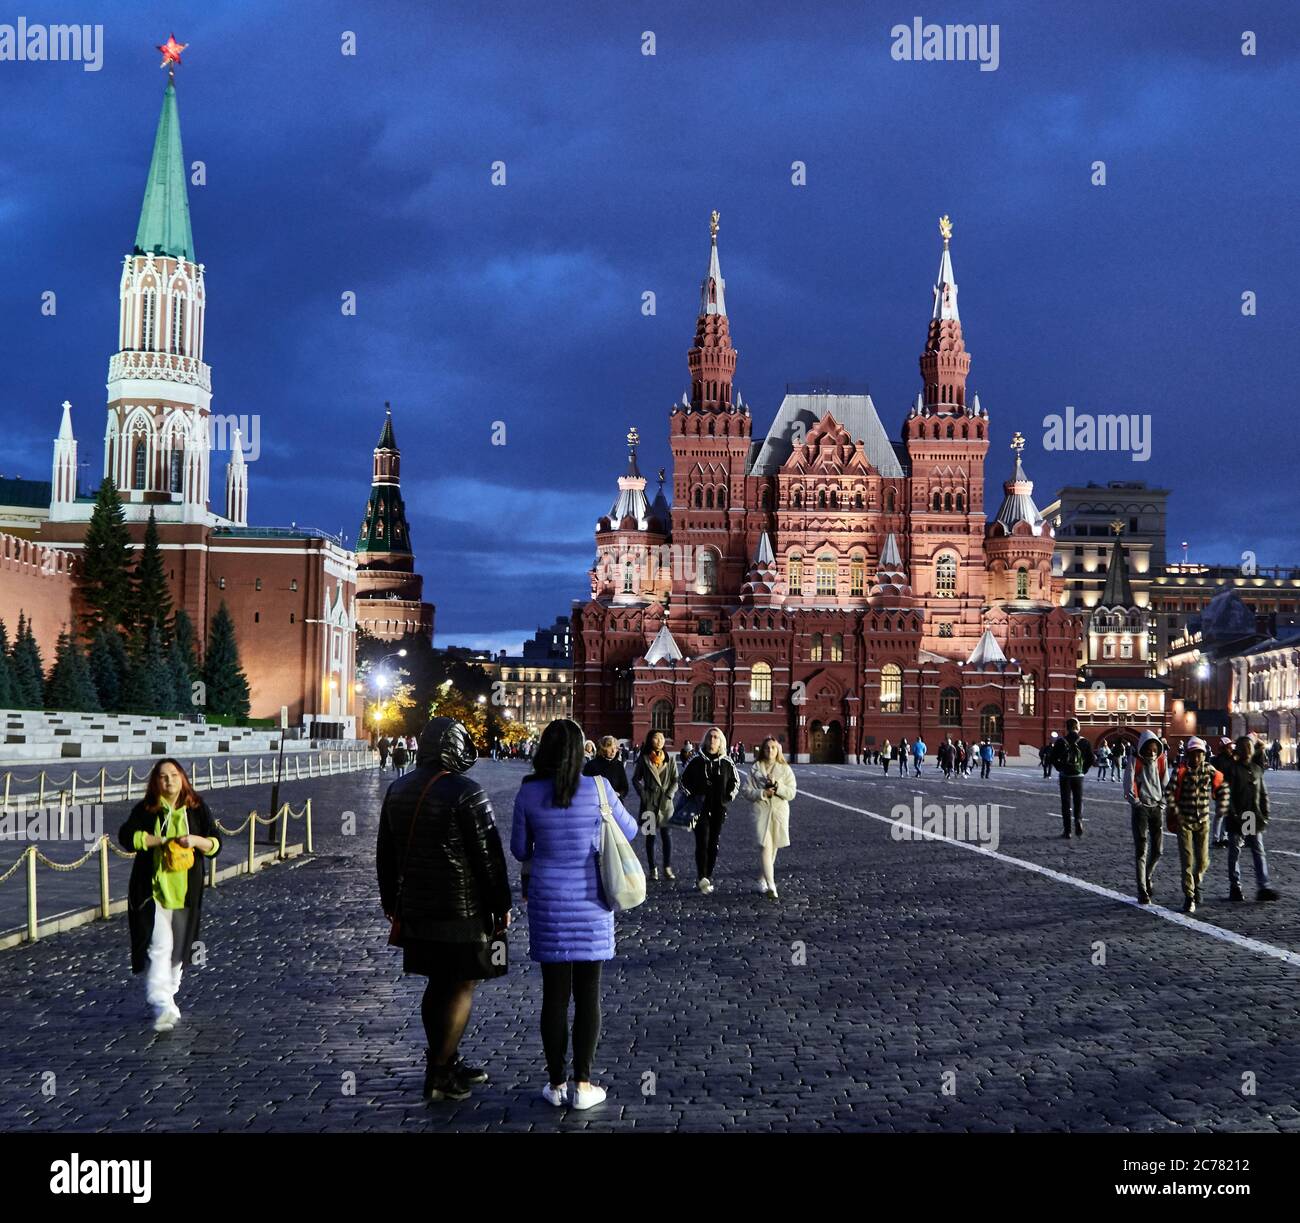 Moscow, Russia. The State Historical Museum and Grand Kremlin Palace situeted on the Red Square is Russian history. At dusk lot of peoples like to walk on the Red Square. Stock Photo